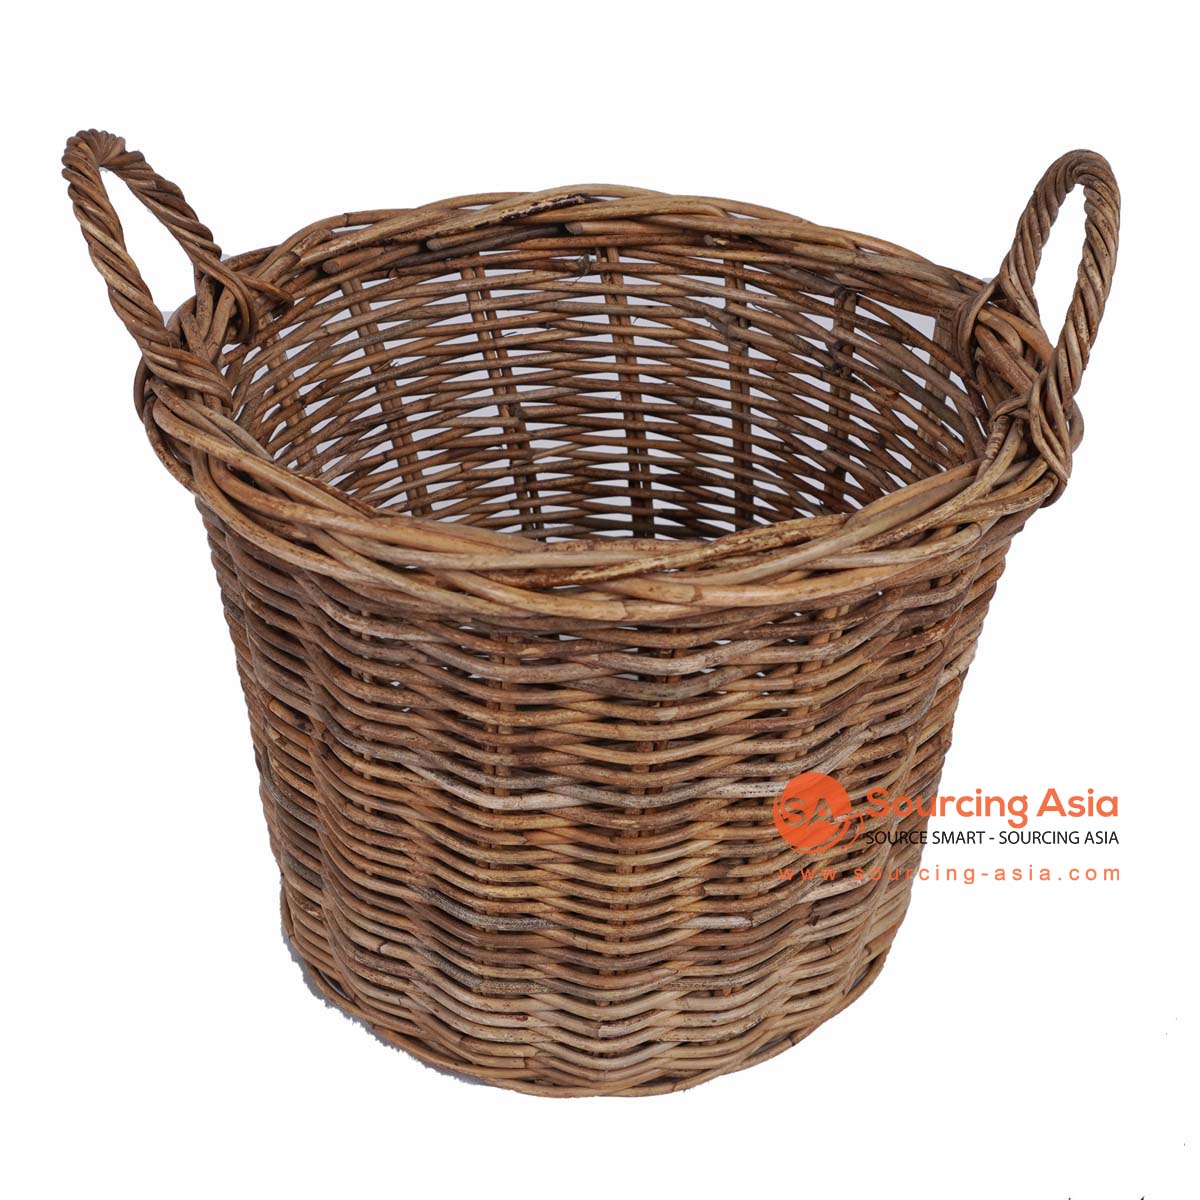 HBSC296 NATURAL RATTAN BASKET WITH HANDLE